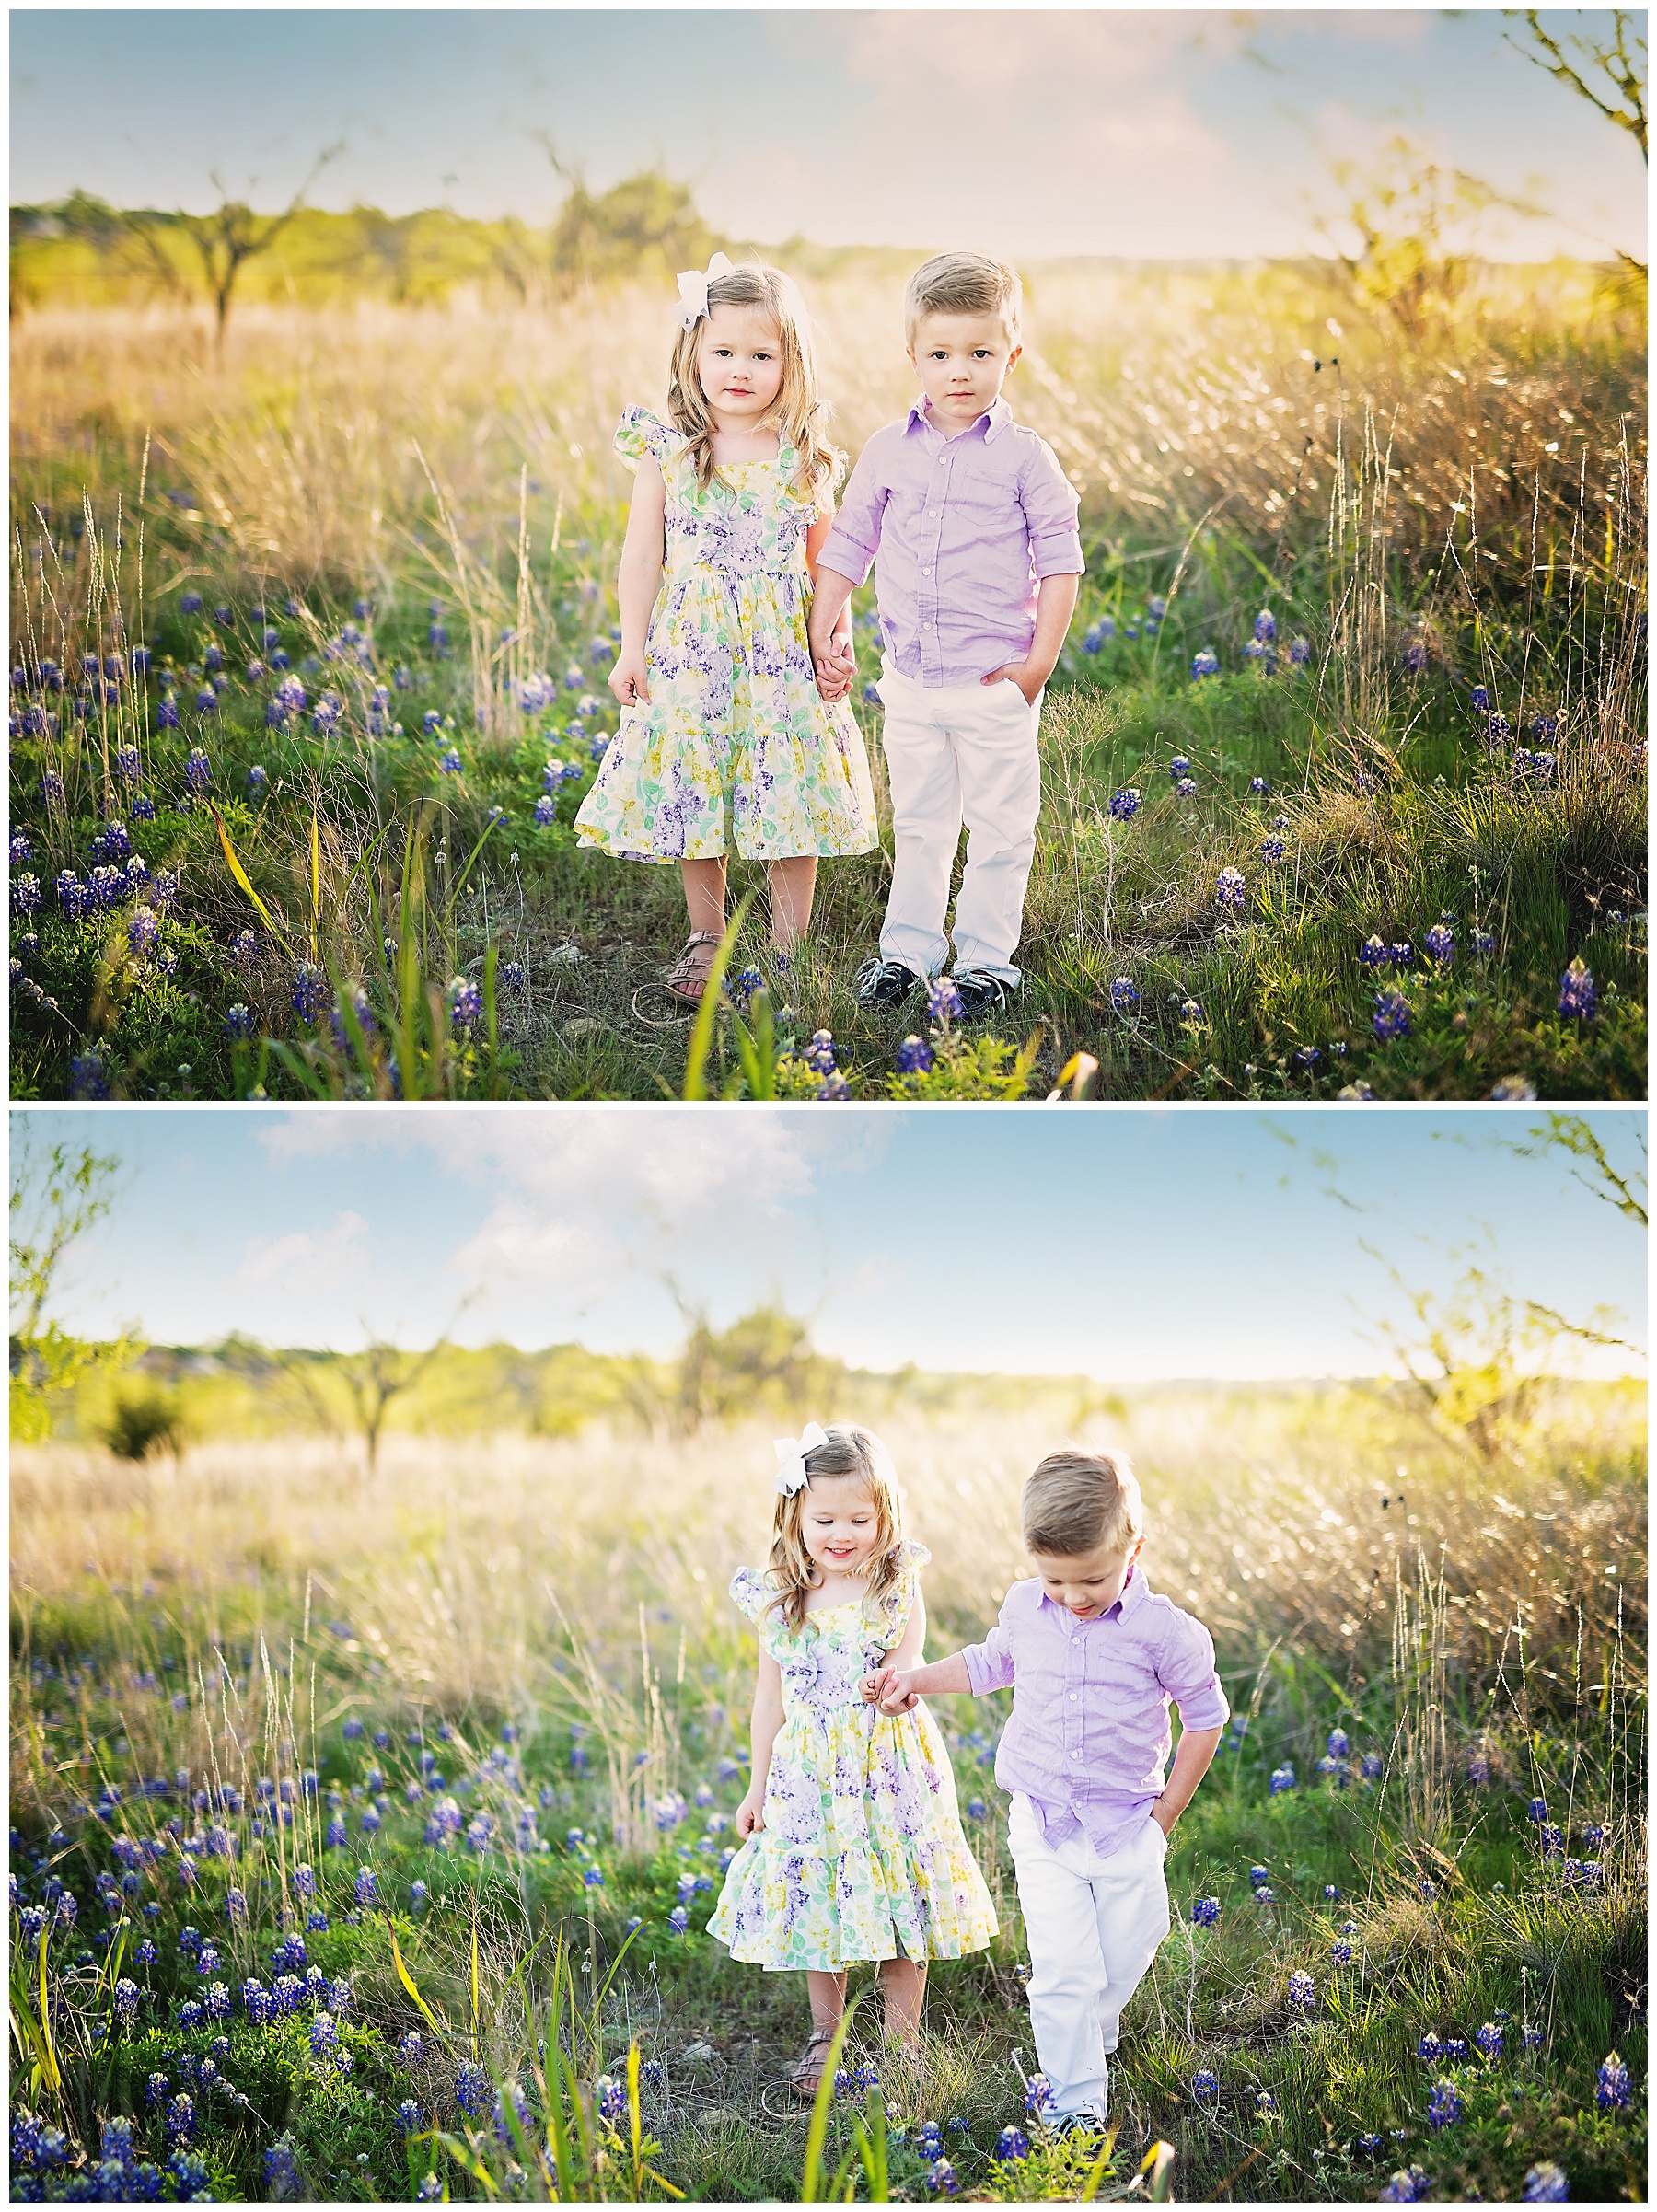 brother and sister walking through the bluebonnet field